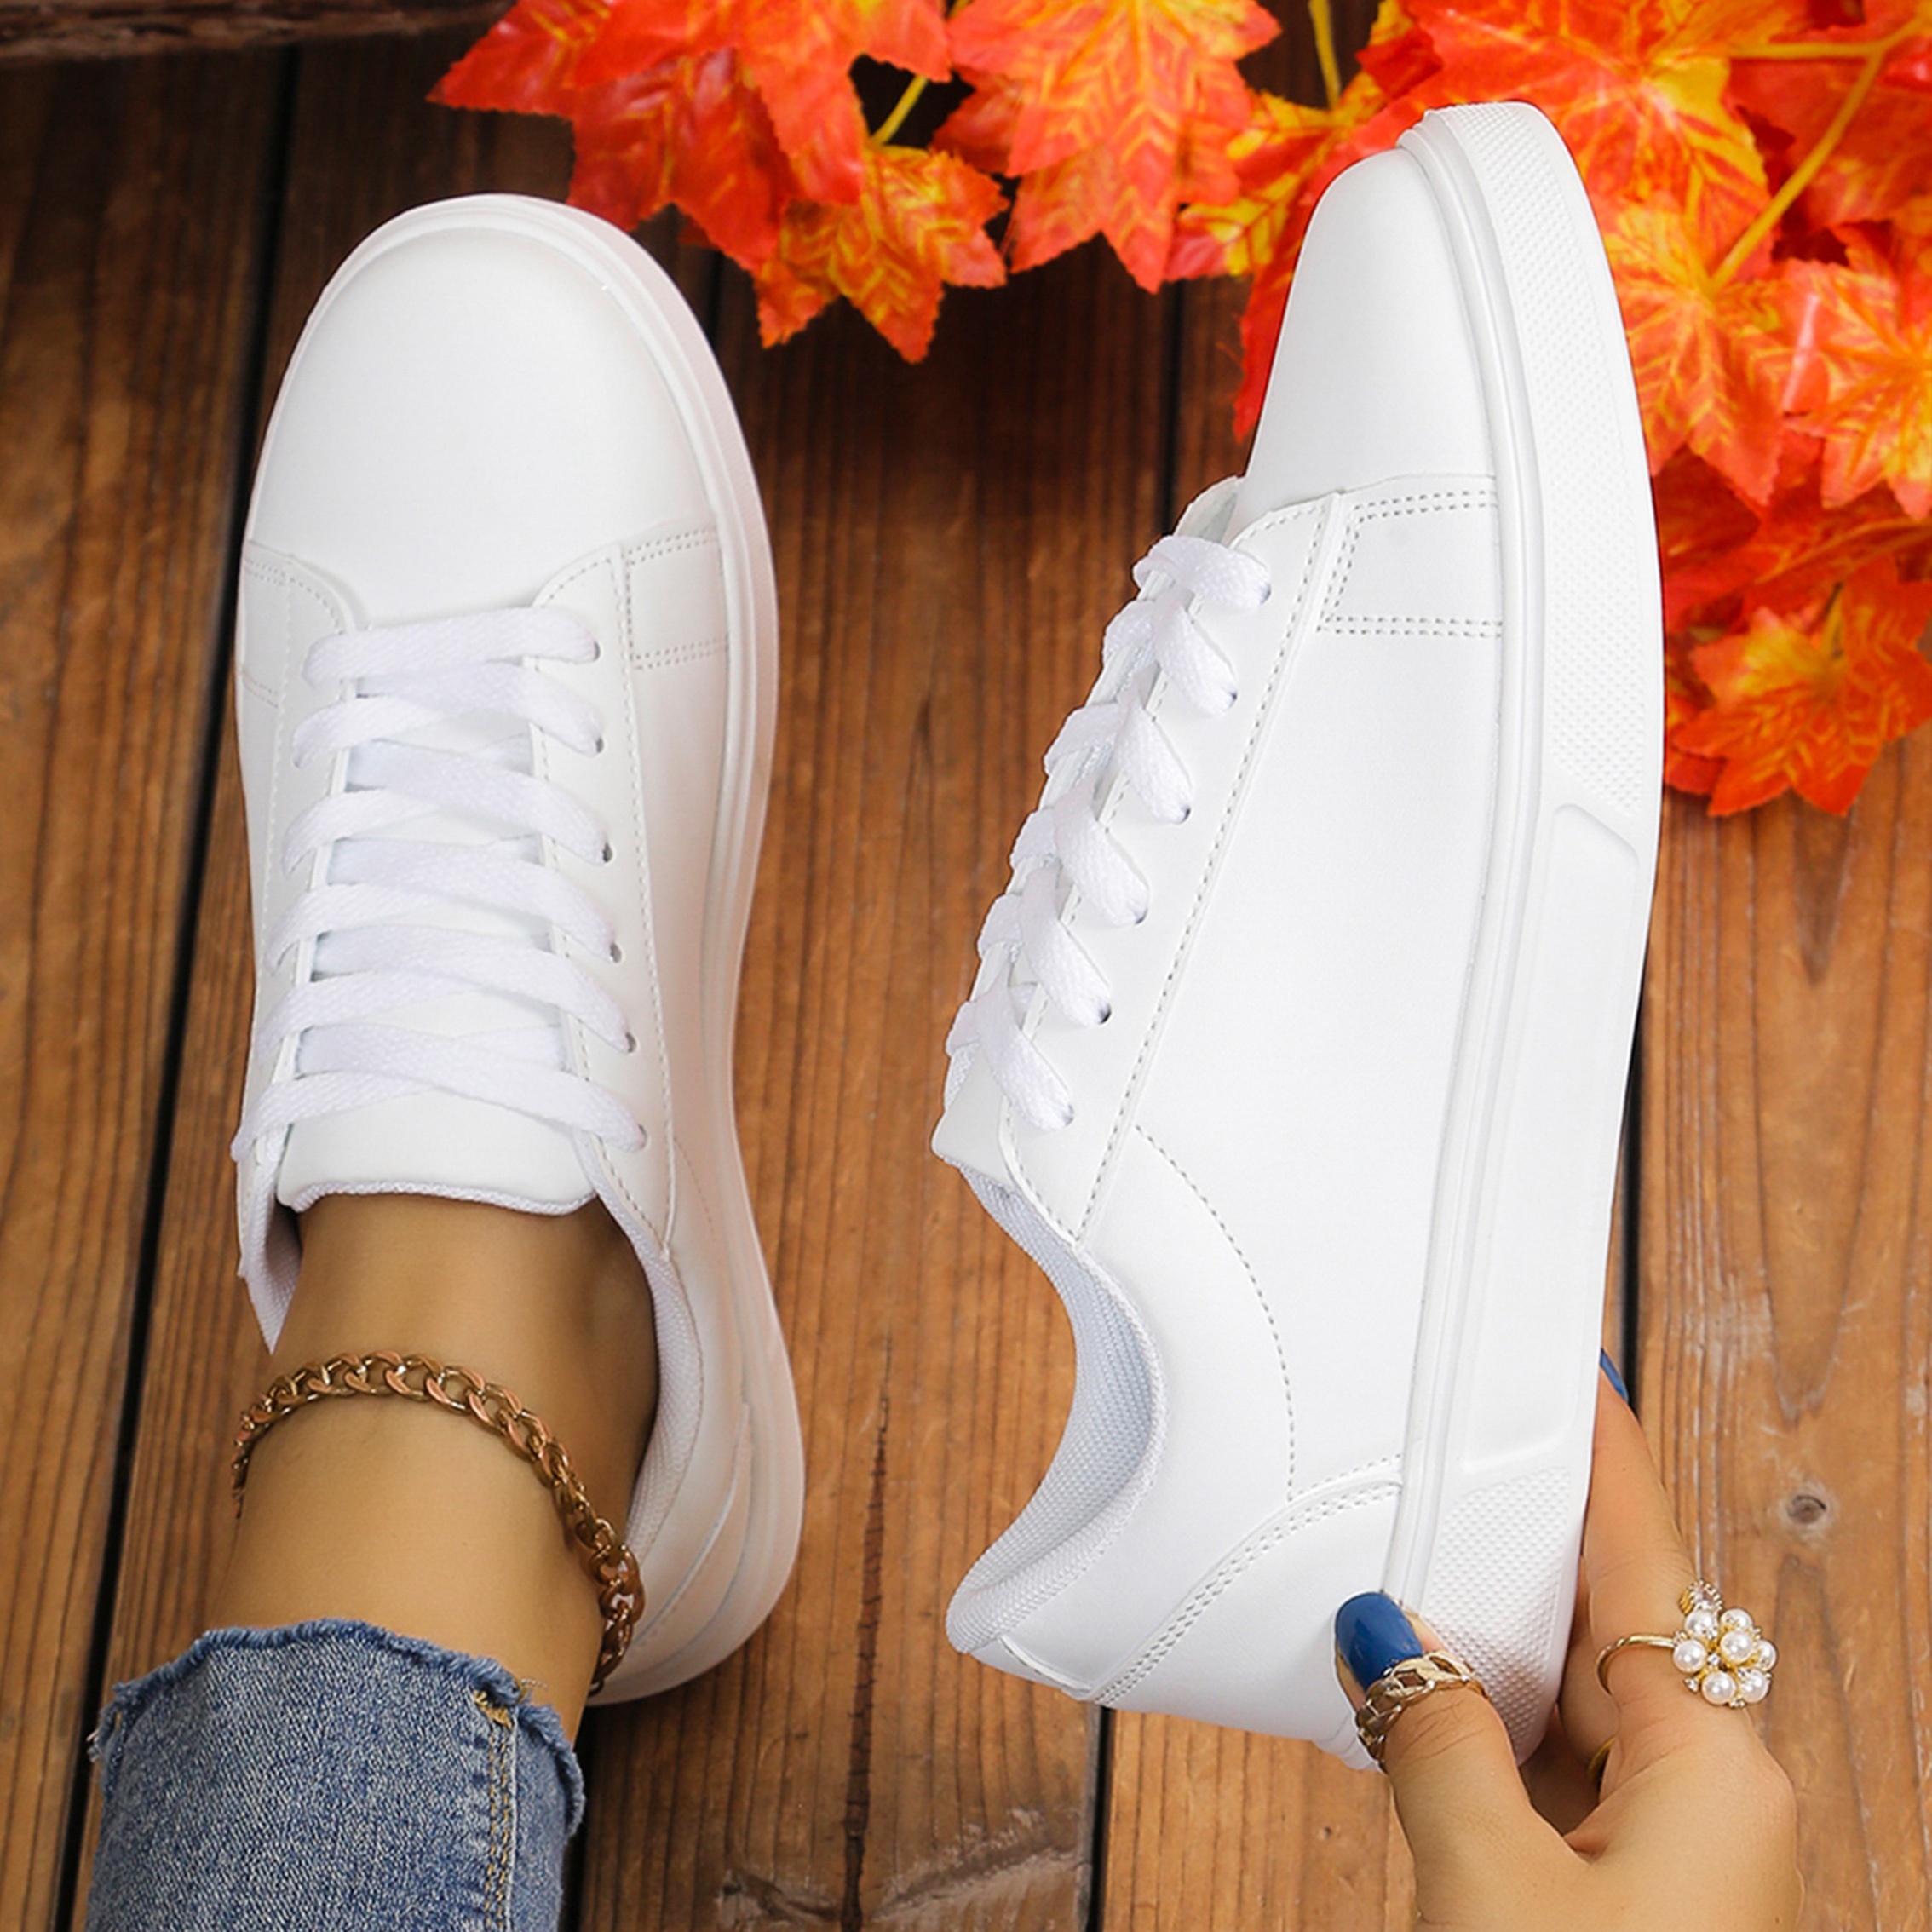 

Solid White Minimalist Women's Lace Up Low Top Sneakers, Casual Comfortable Flat Sport Shoes